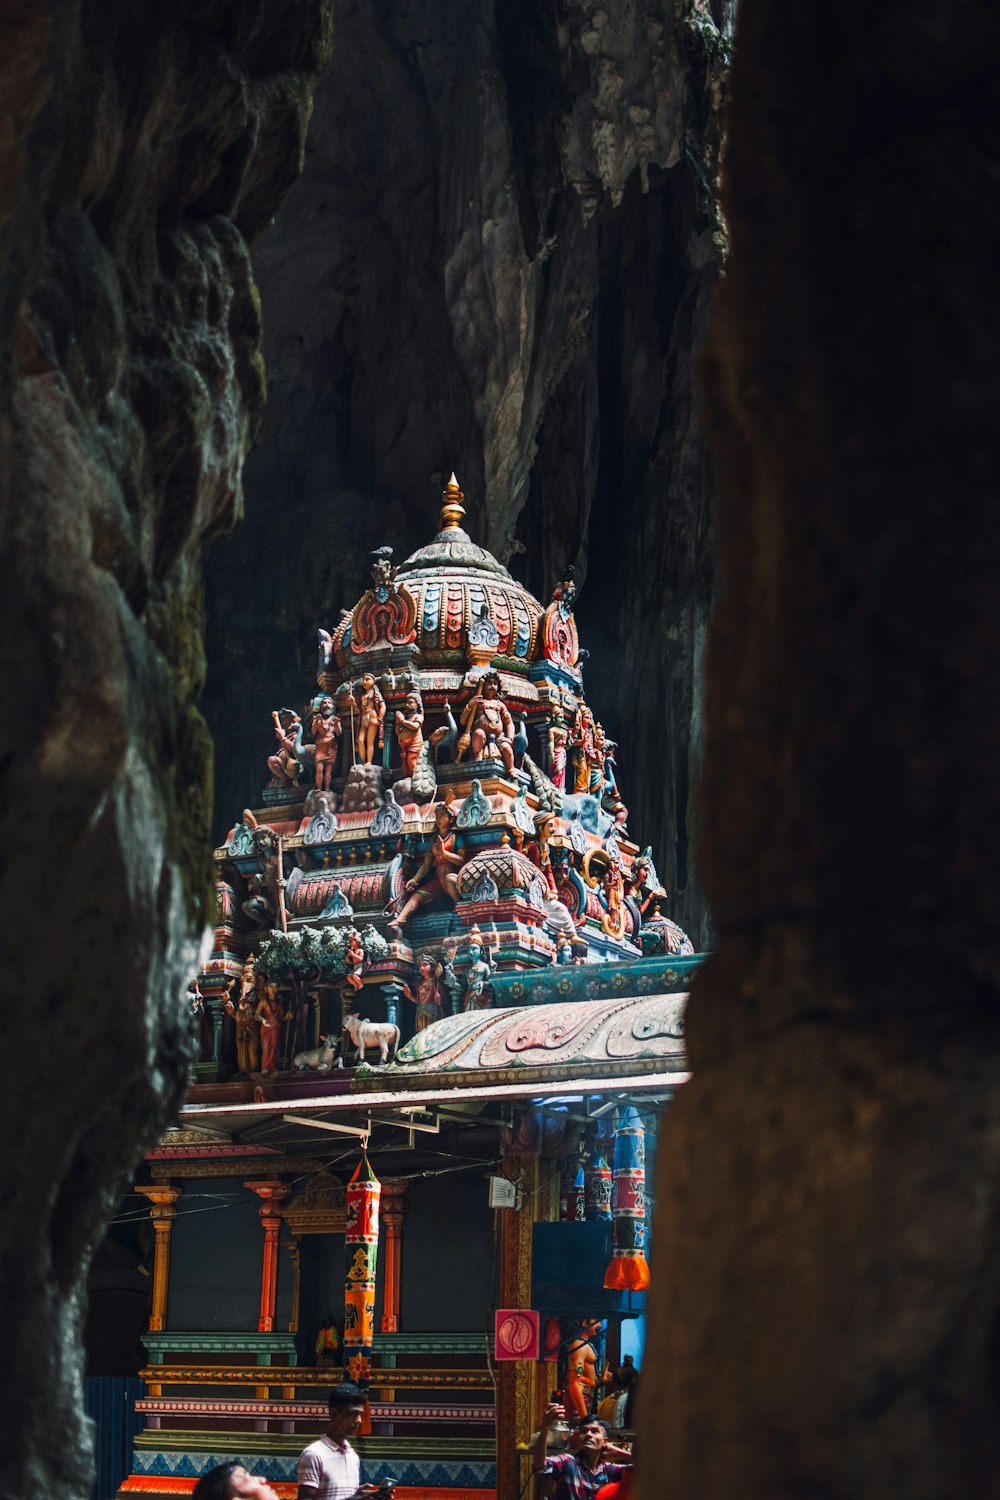 a small temple in the middle of a cave